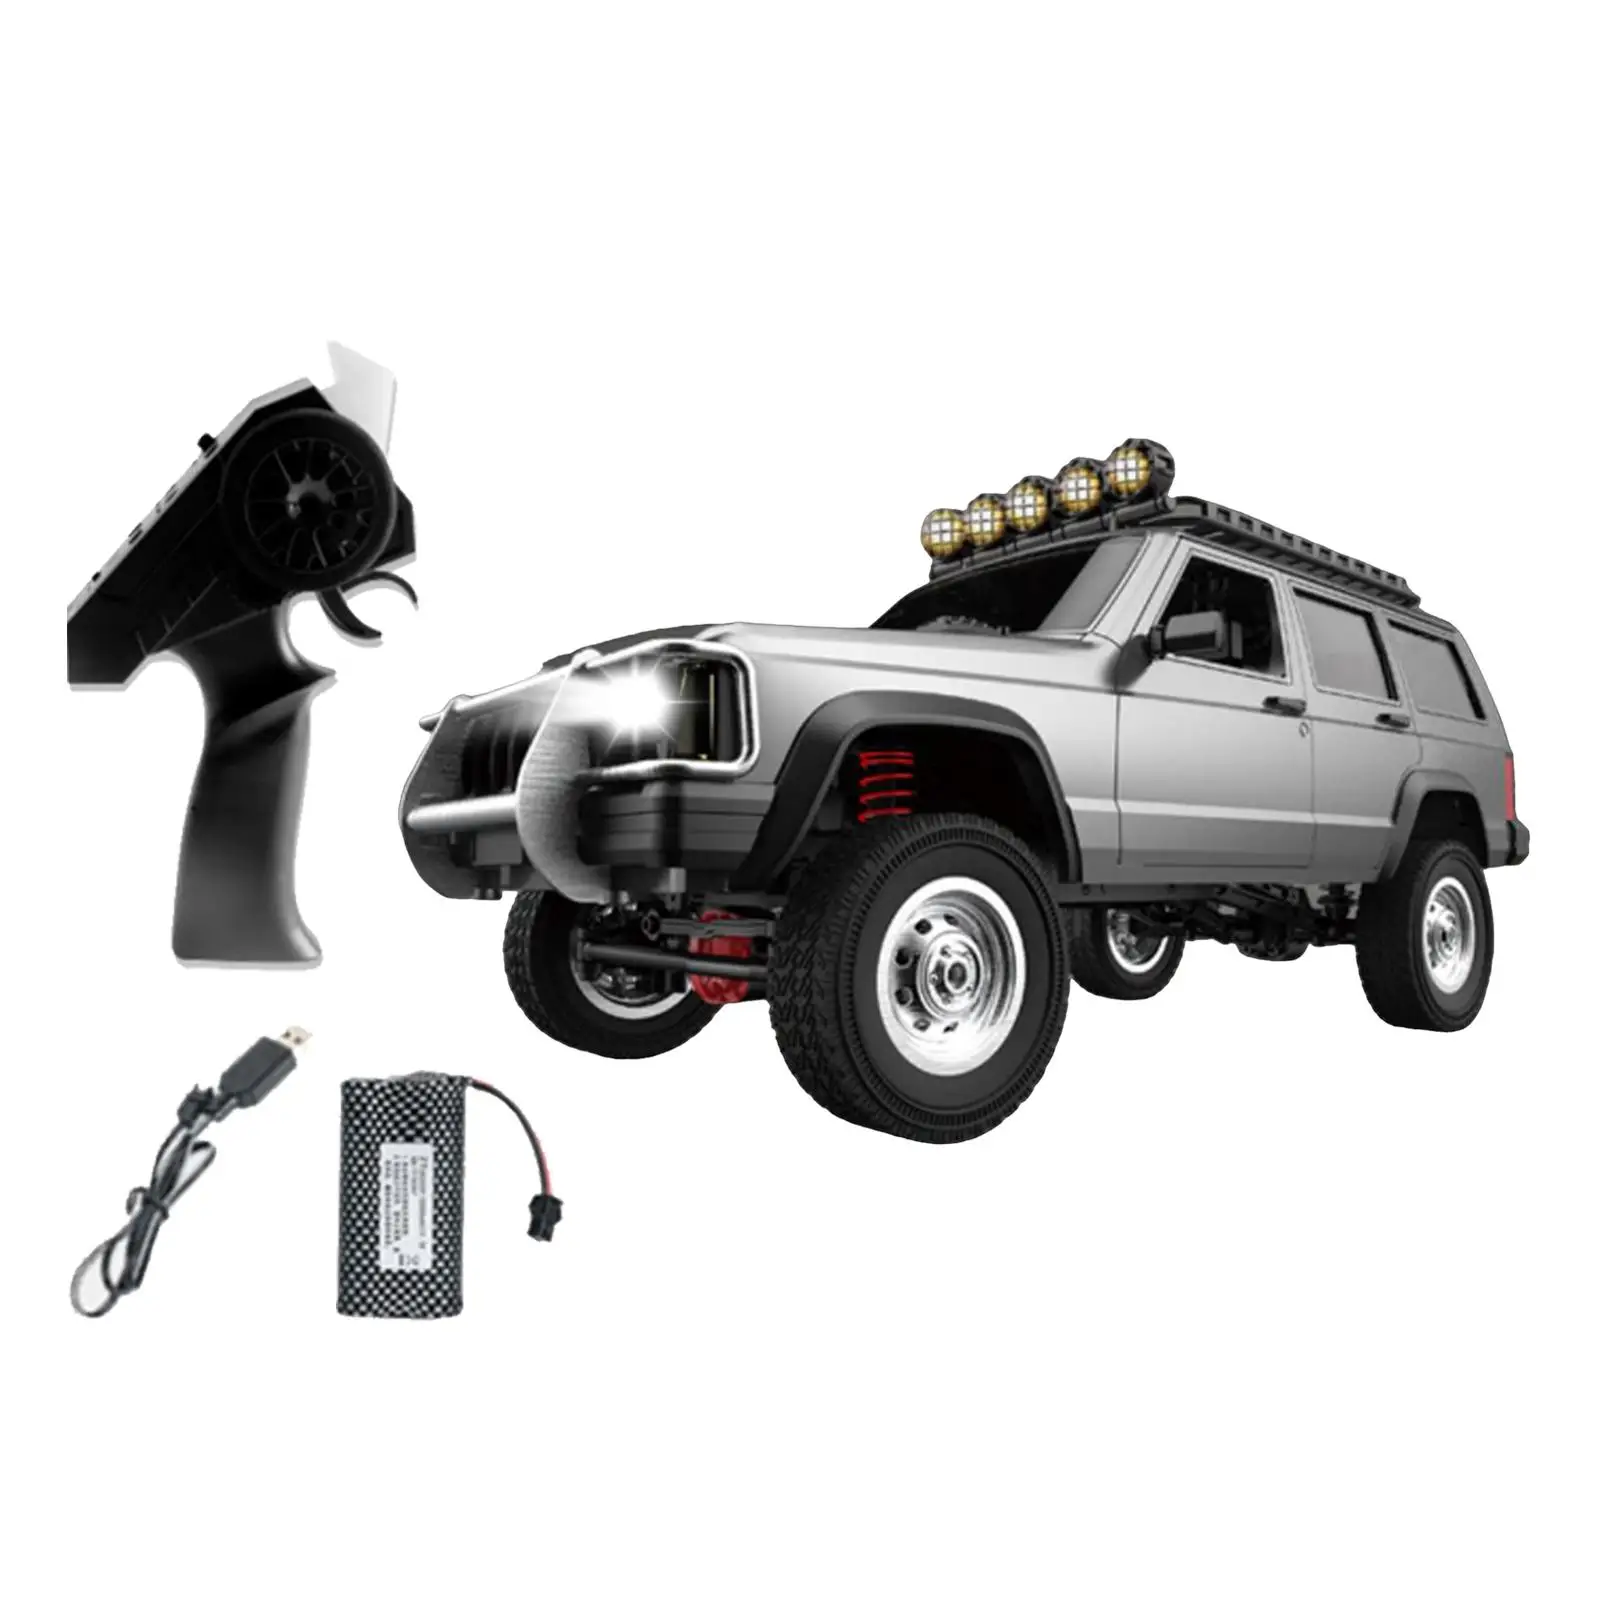 Huge 1:12 RC Car Rechargeable Battery LED Headlight 2.4G Off Road Trucks Pickup All Terrain Toy for Gifts Adult Kids Children